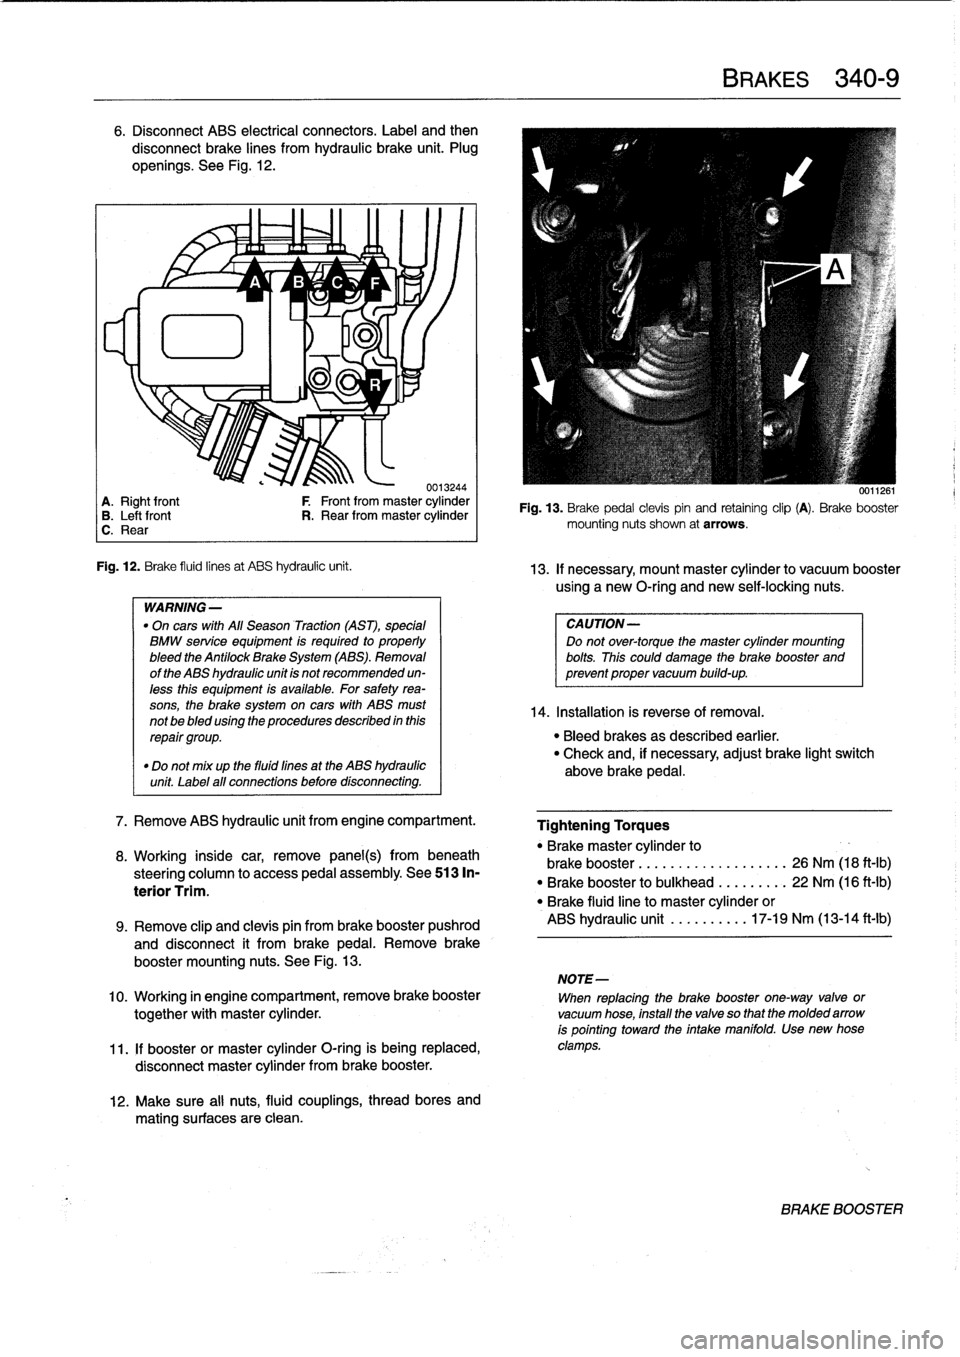 BMW 325i 1992 E36 Owners Manual 6
.
Disconnect
ABS
electrical
connectors
.
Label
and
then

disconnect
brake
lines
from
hydraulic
brake
unit
.
Plug

openíngs
.
See
Fig
.
12
.

~
~
A
1/
B
1v
C
~
F

lu
11
-ri
J
.

0013244
A
.
Right
f